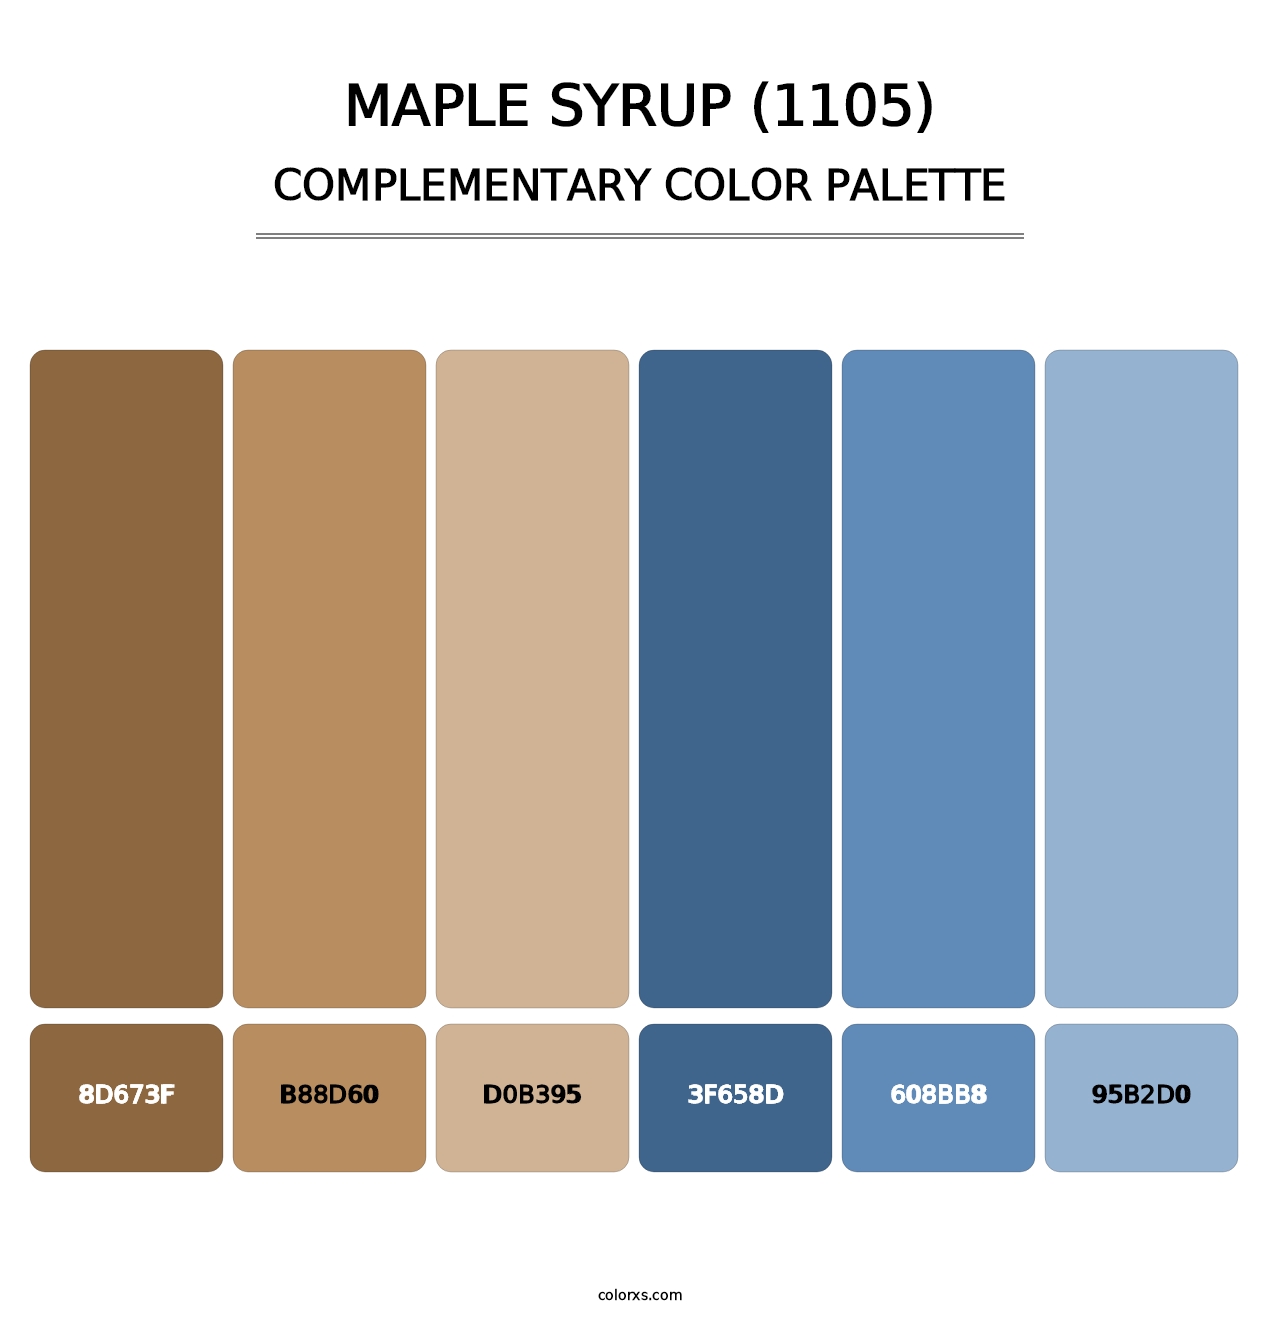 Maple Syrup (1105) - Complementary Color Palette